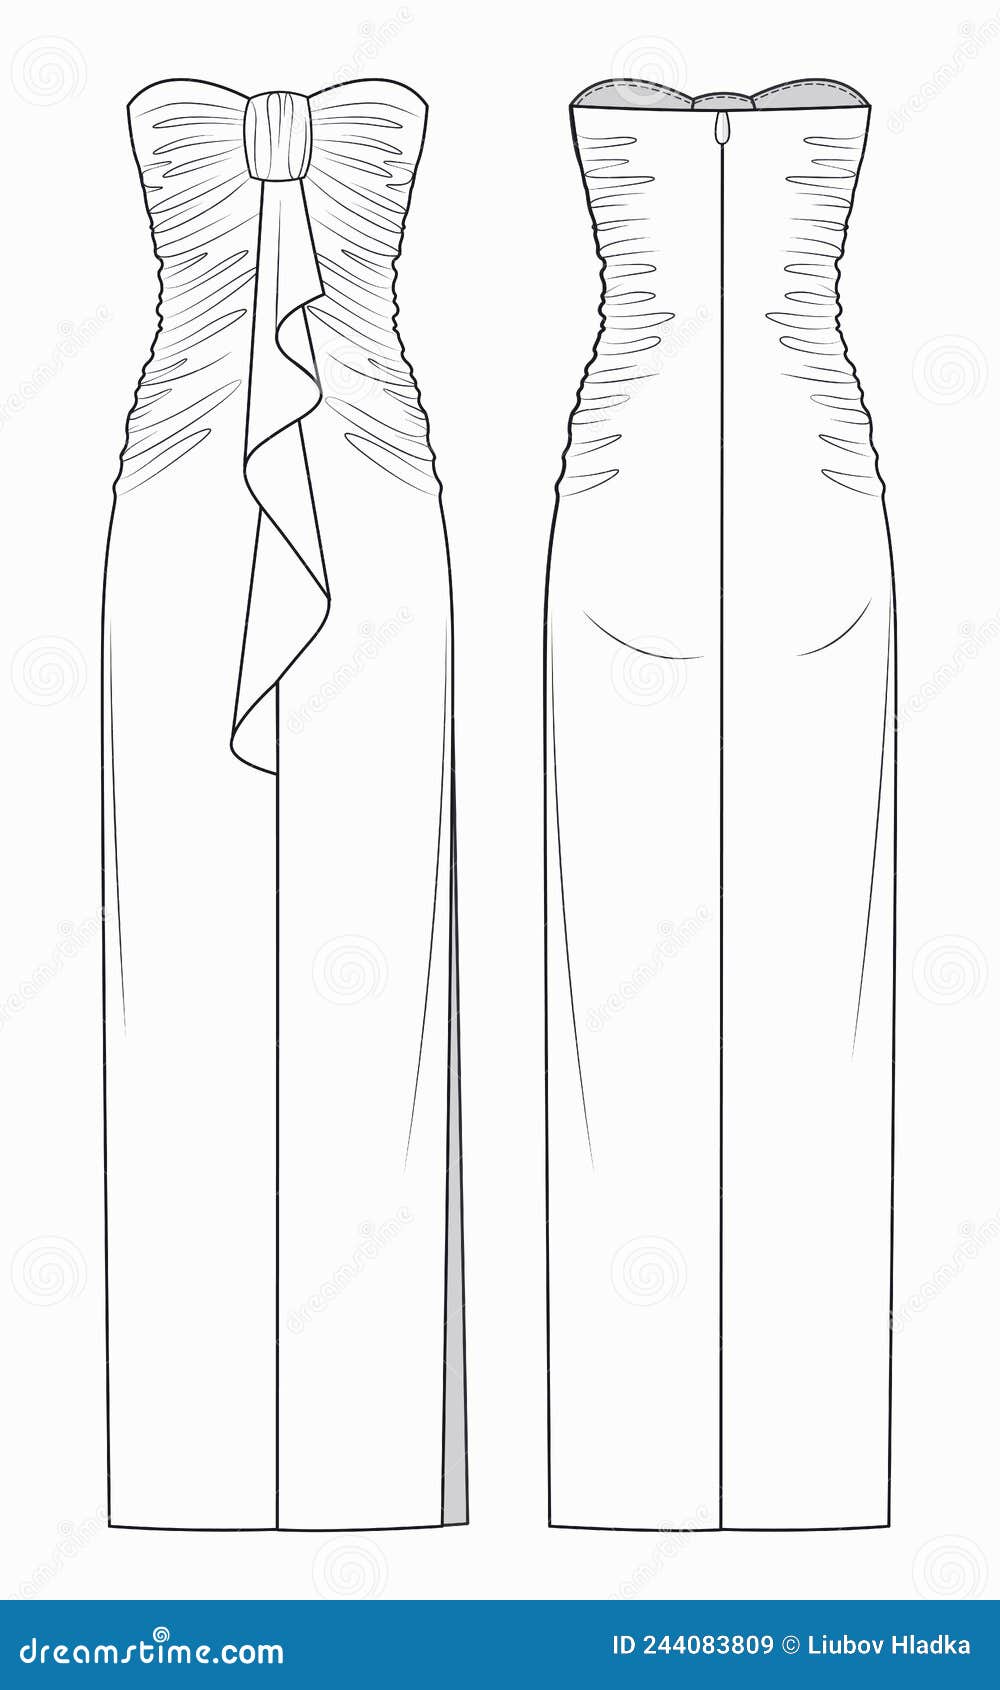 Flat Fashion Technical Sketch - Asymmetric Wrap Dress Stock Photo, Picture  and Royalty Free Image. Image 72286868.